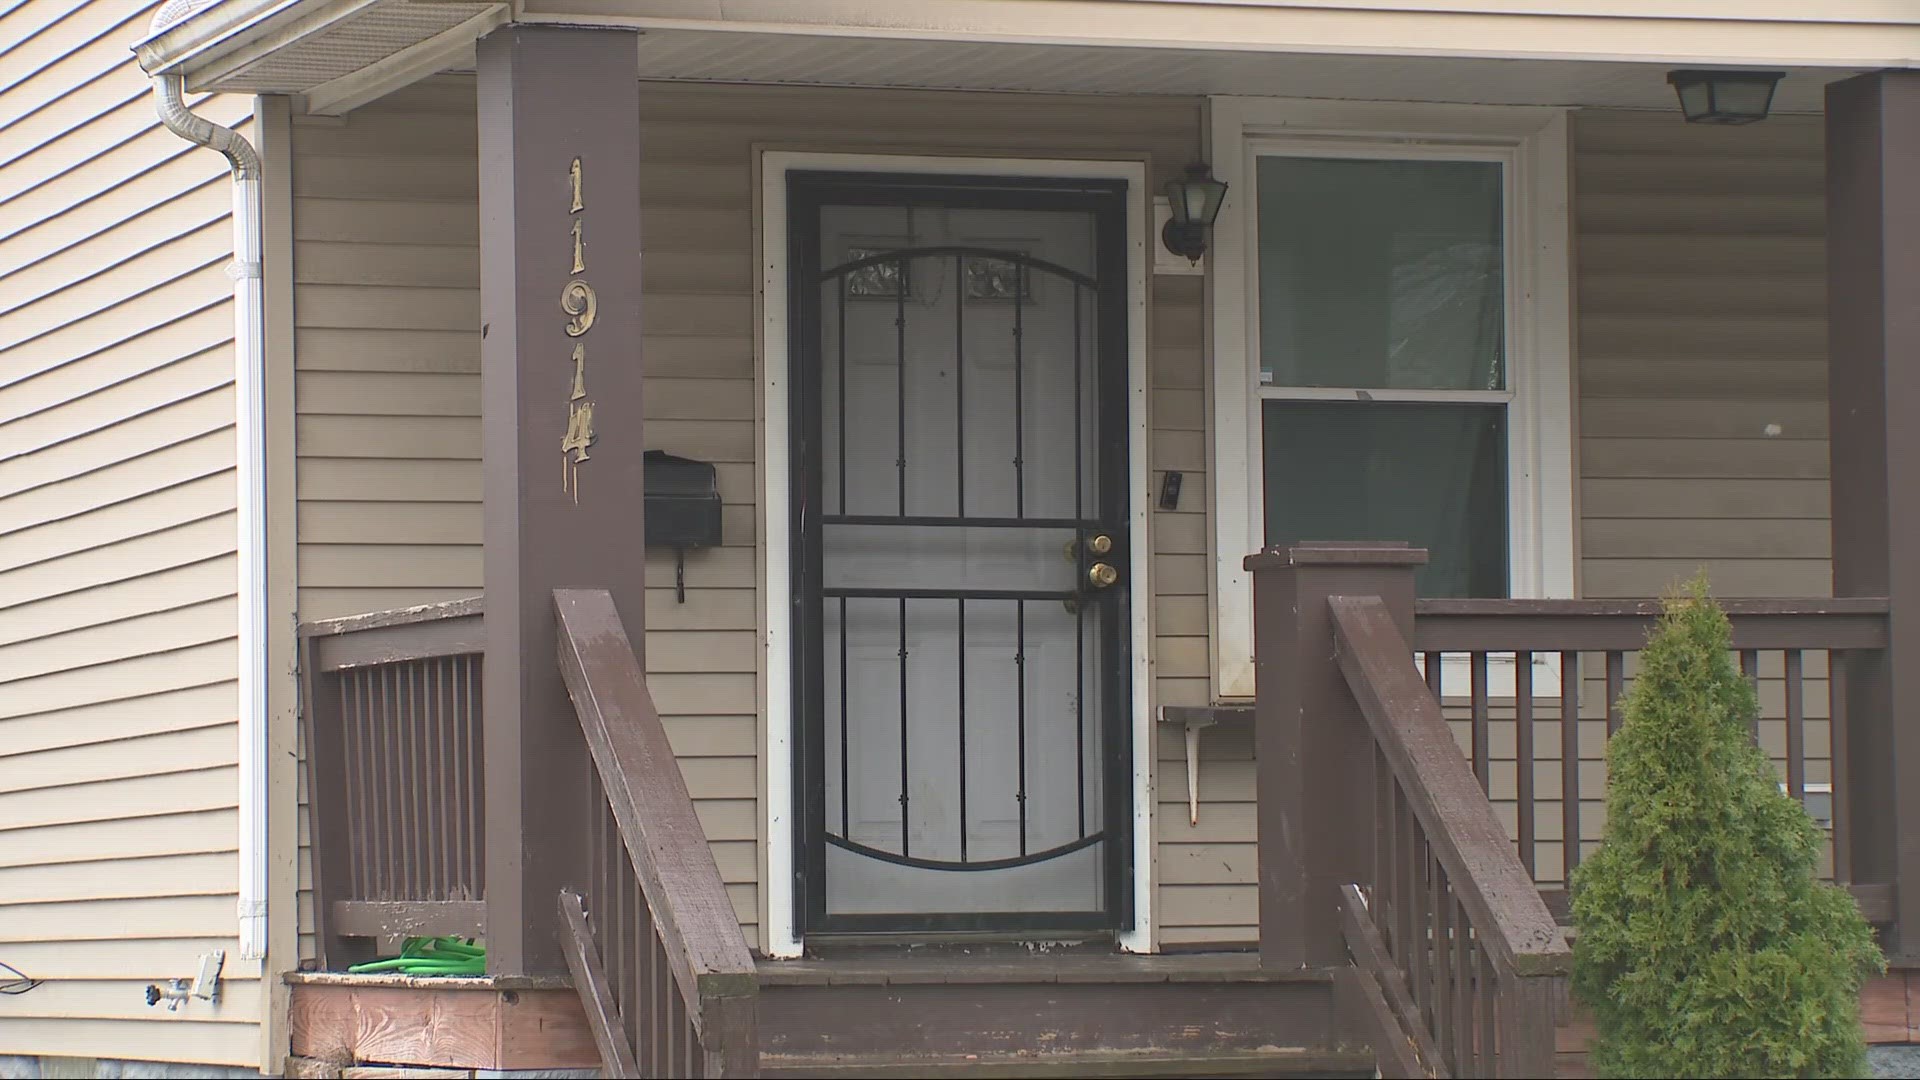 A 5-year-old child died in Cleveland following suspected neglect.